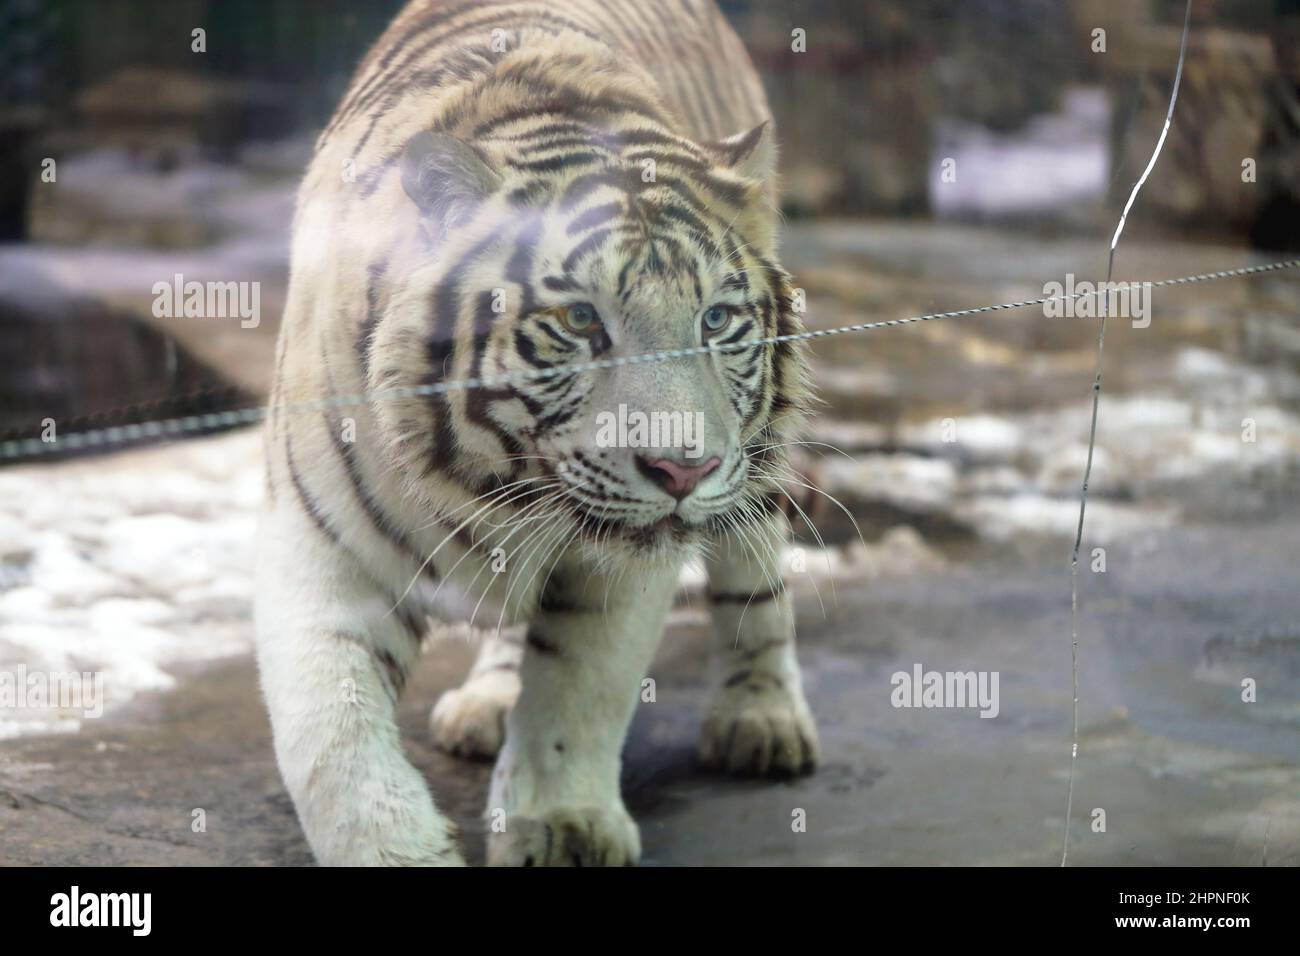 beautiful white tiger stands in a cage in a zoo photographed in close-up Stock Photo